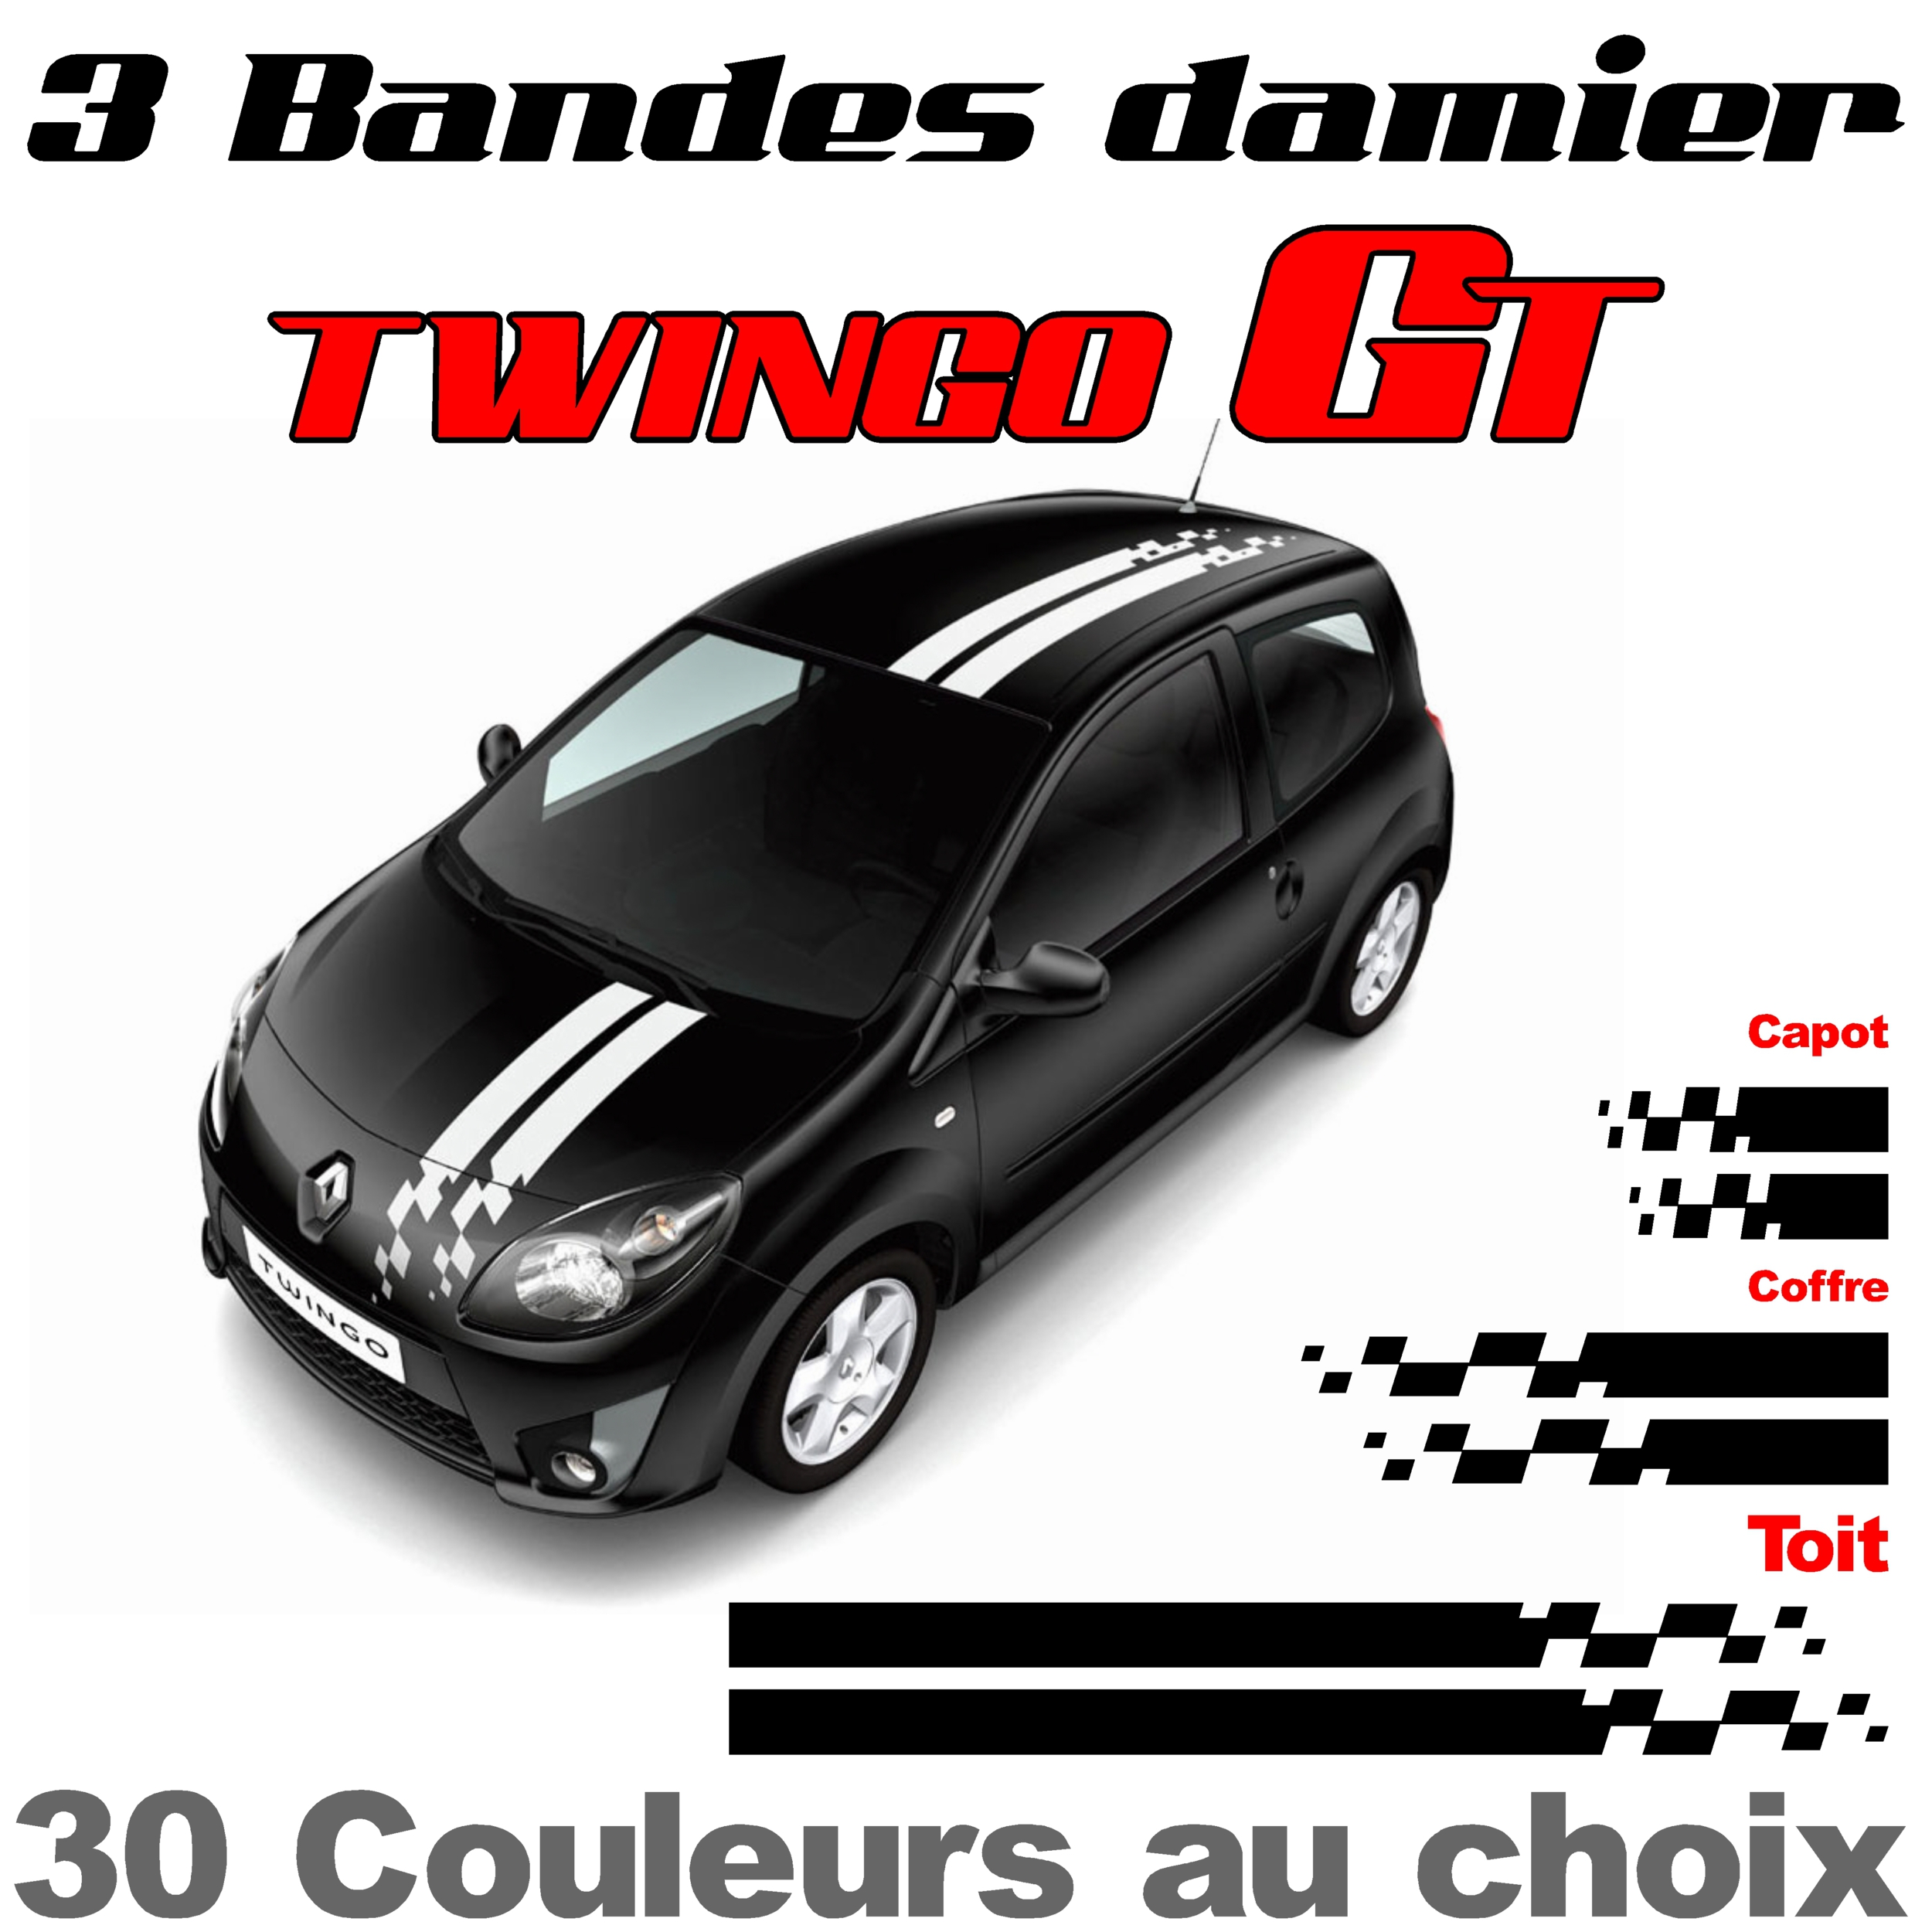 STICKER AUTOCOLLANT DAMIER sport tuning deco voiture decal racing